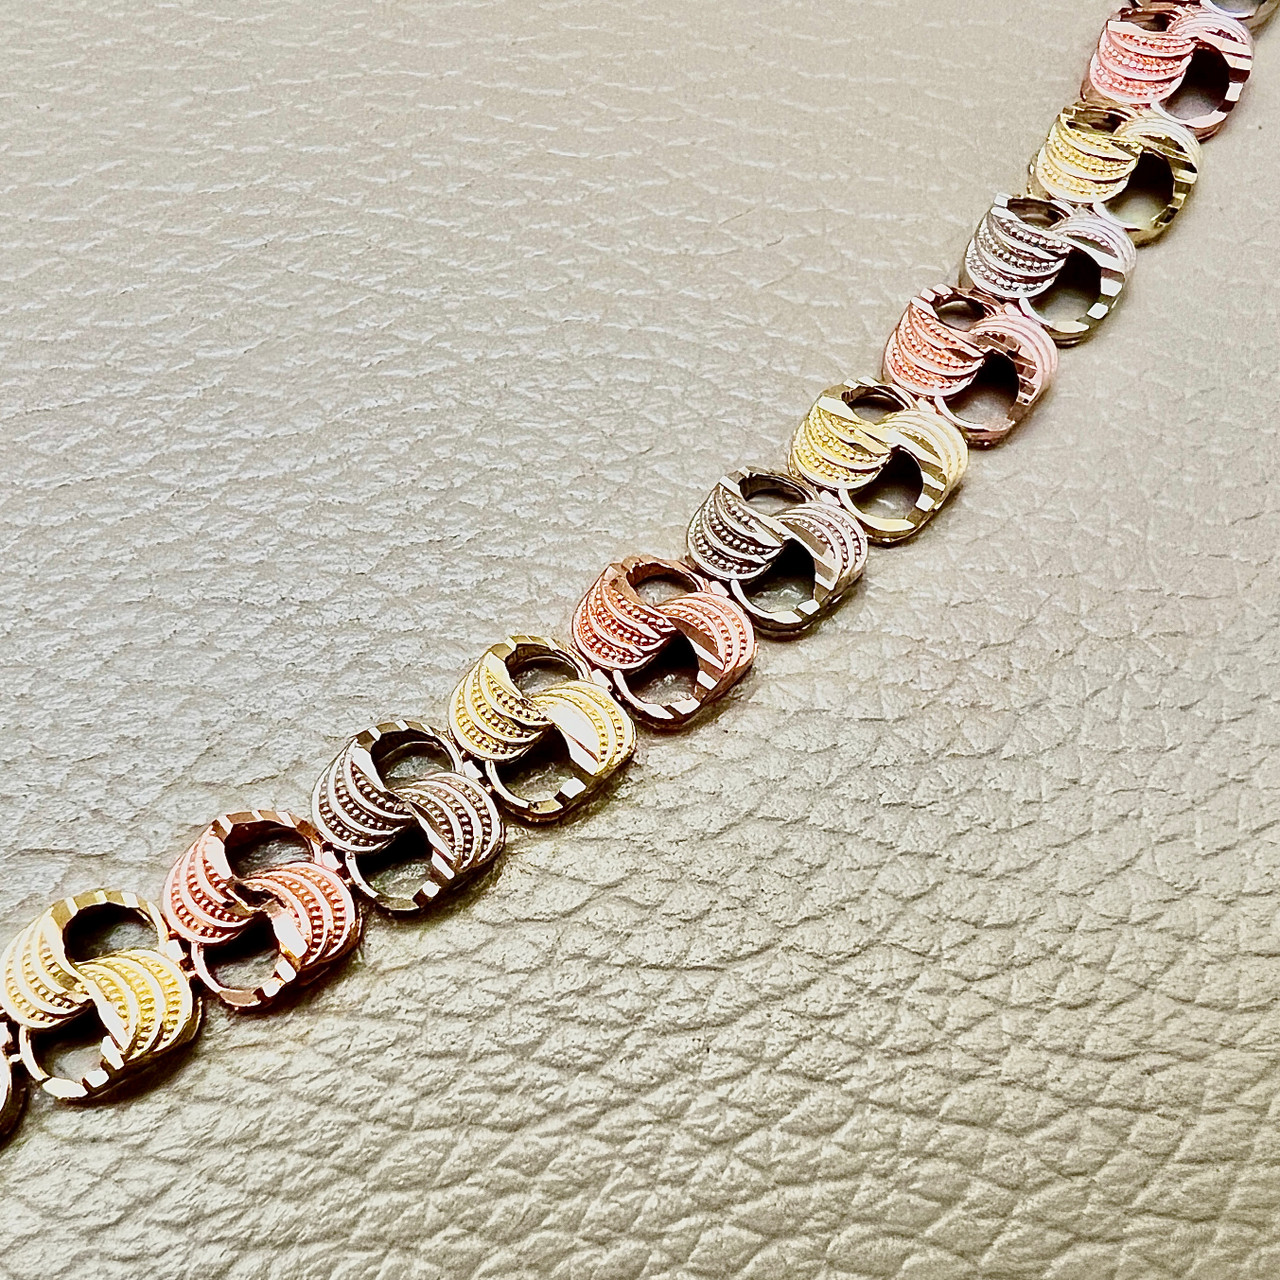 Amazon.com: 14k REAL Tri Color Gold Solid 3mm Star Diamond Cut Chain  Bracelet with Lobster Claw Clasp - 7.5